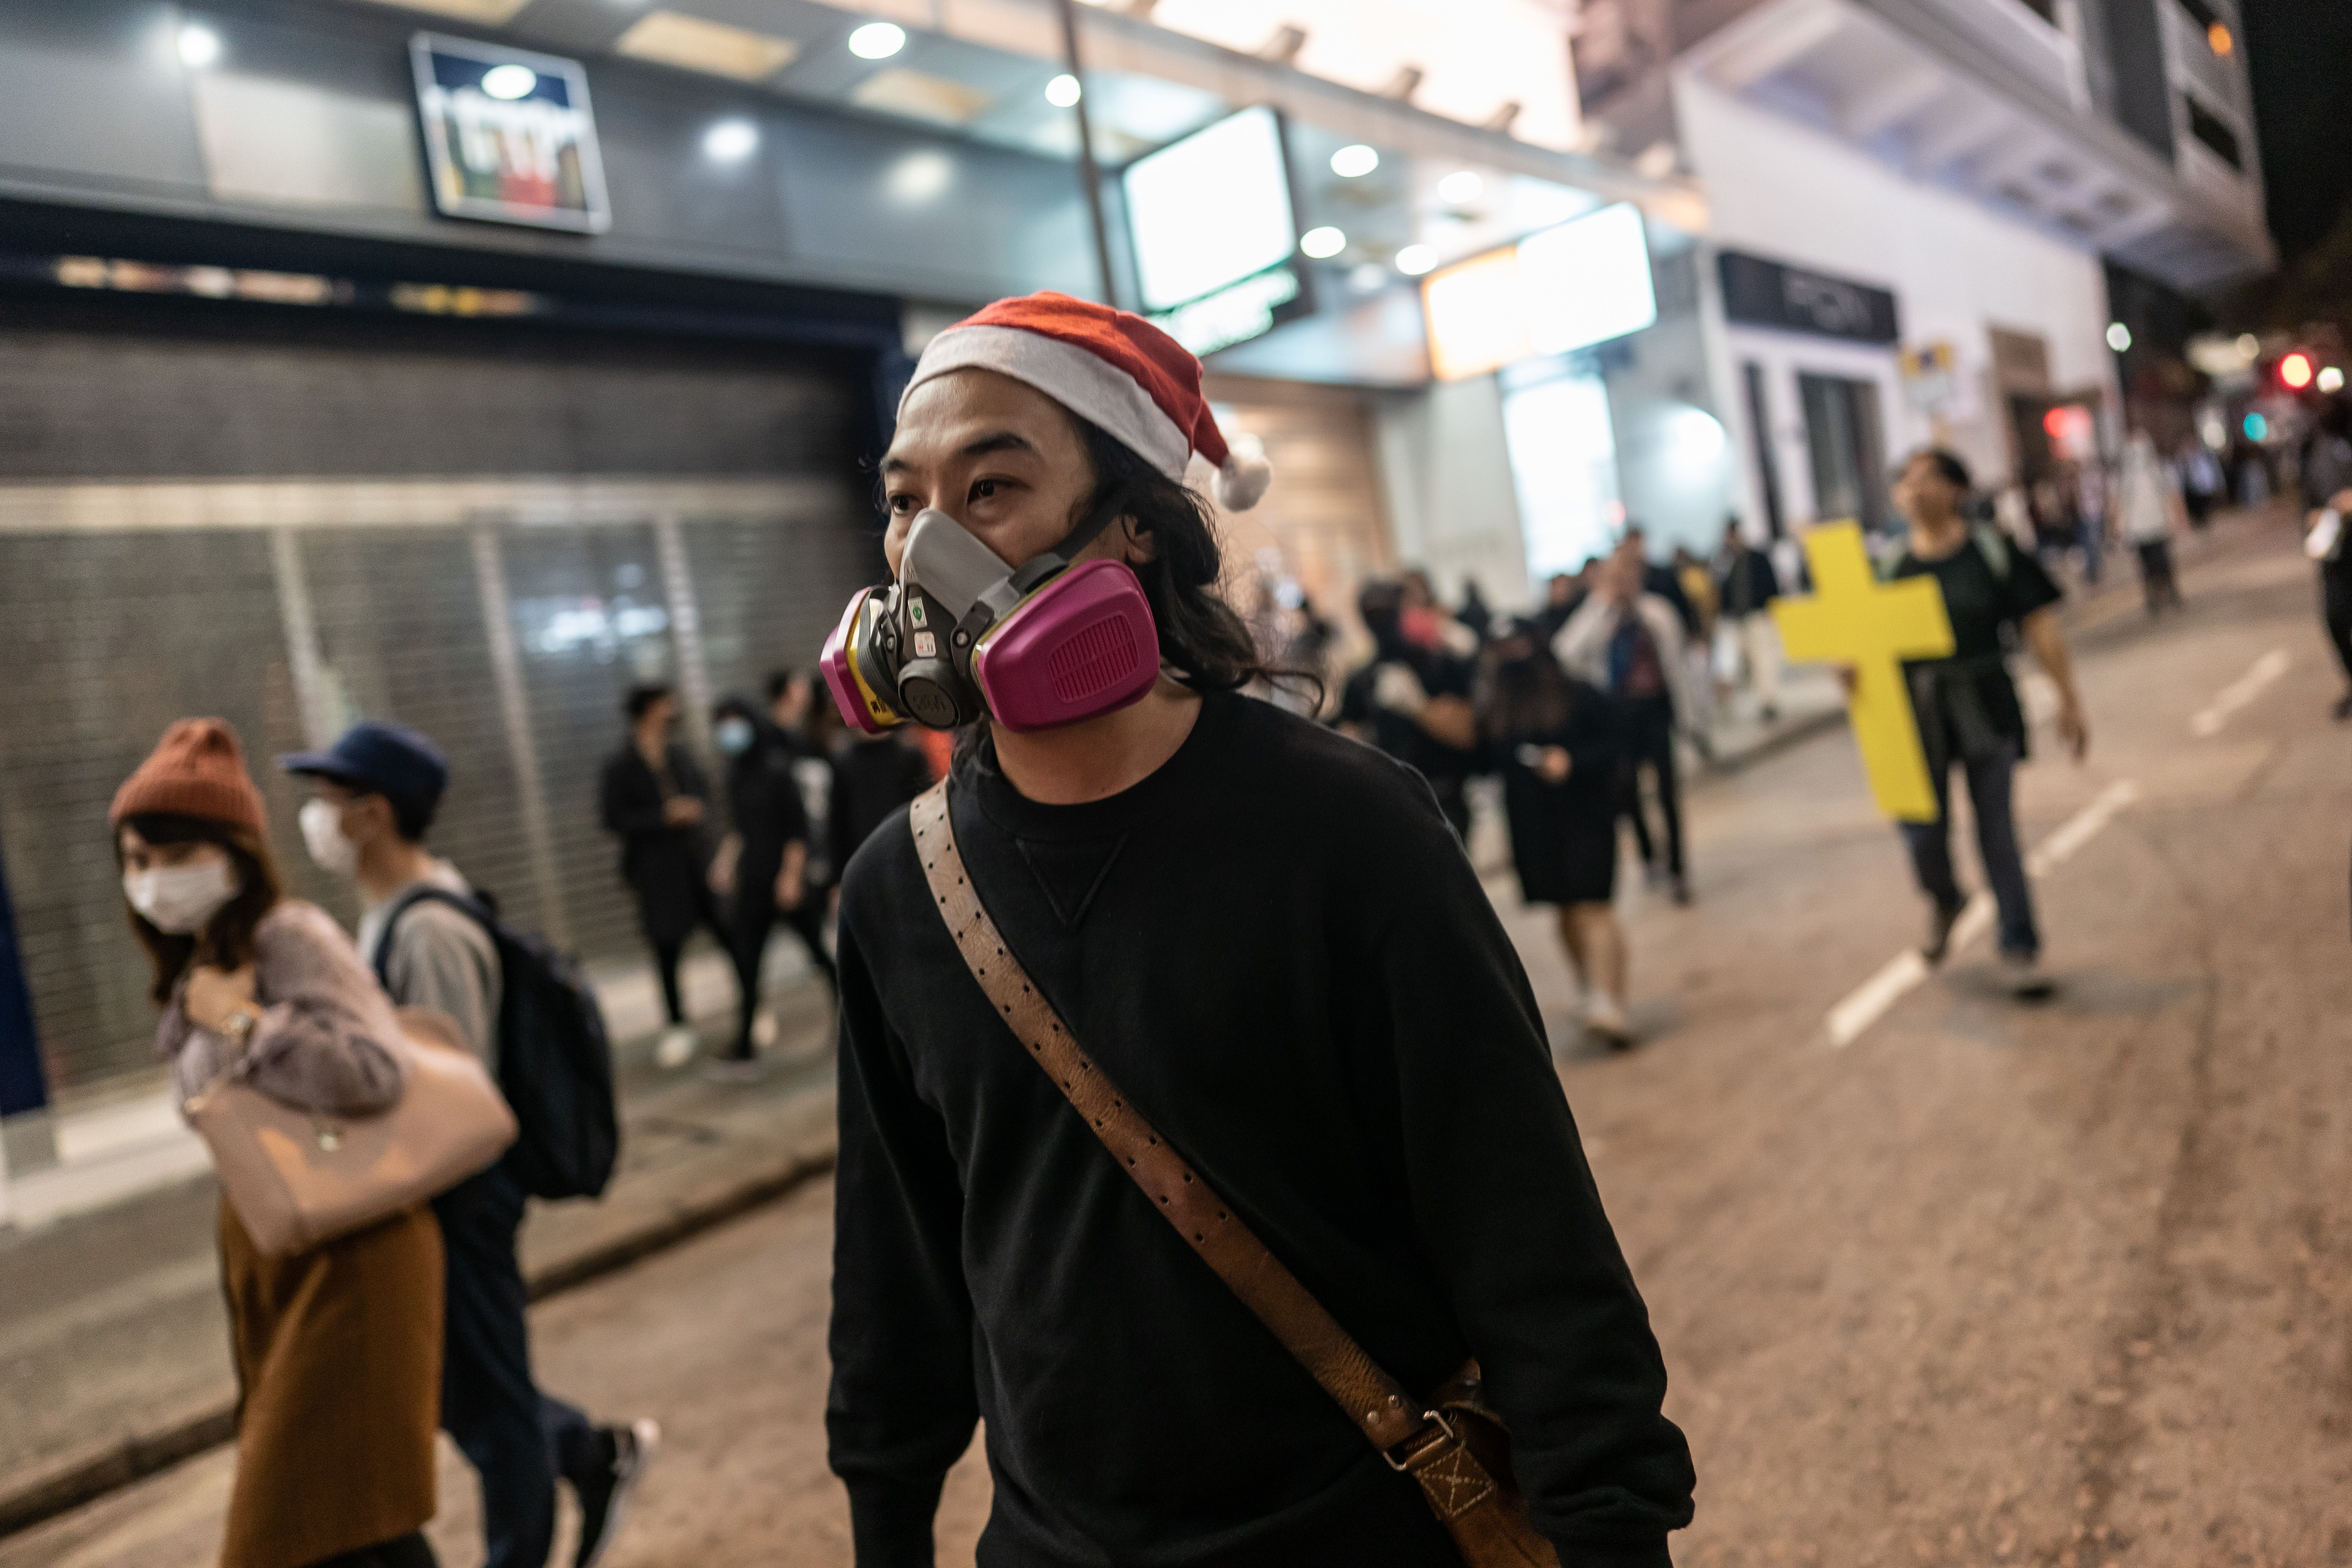 Protesters march on a street during a demonstration on December 24, 2019 in Hong Kong